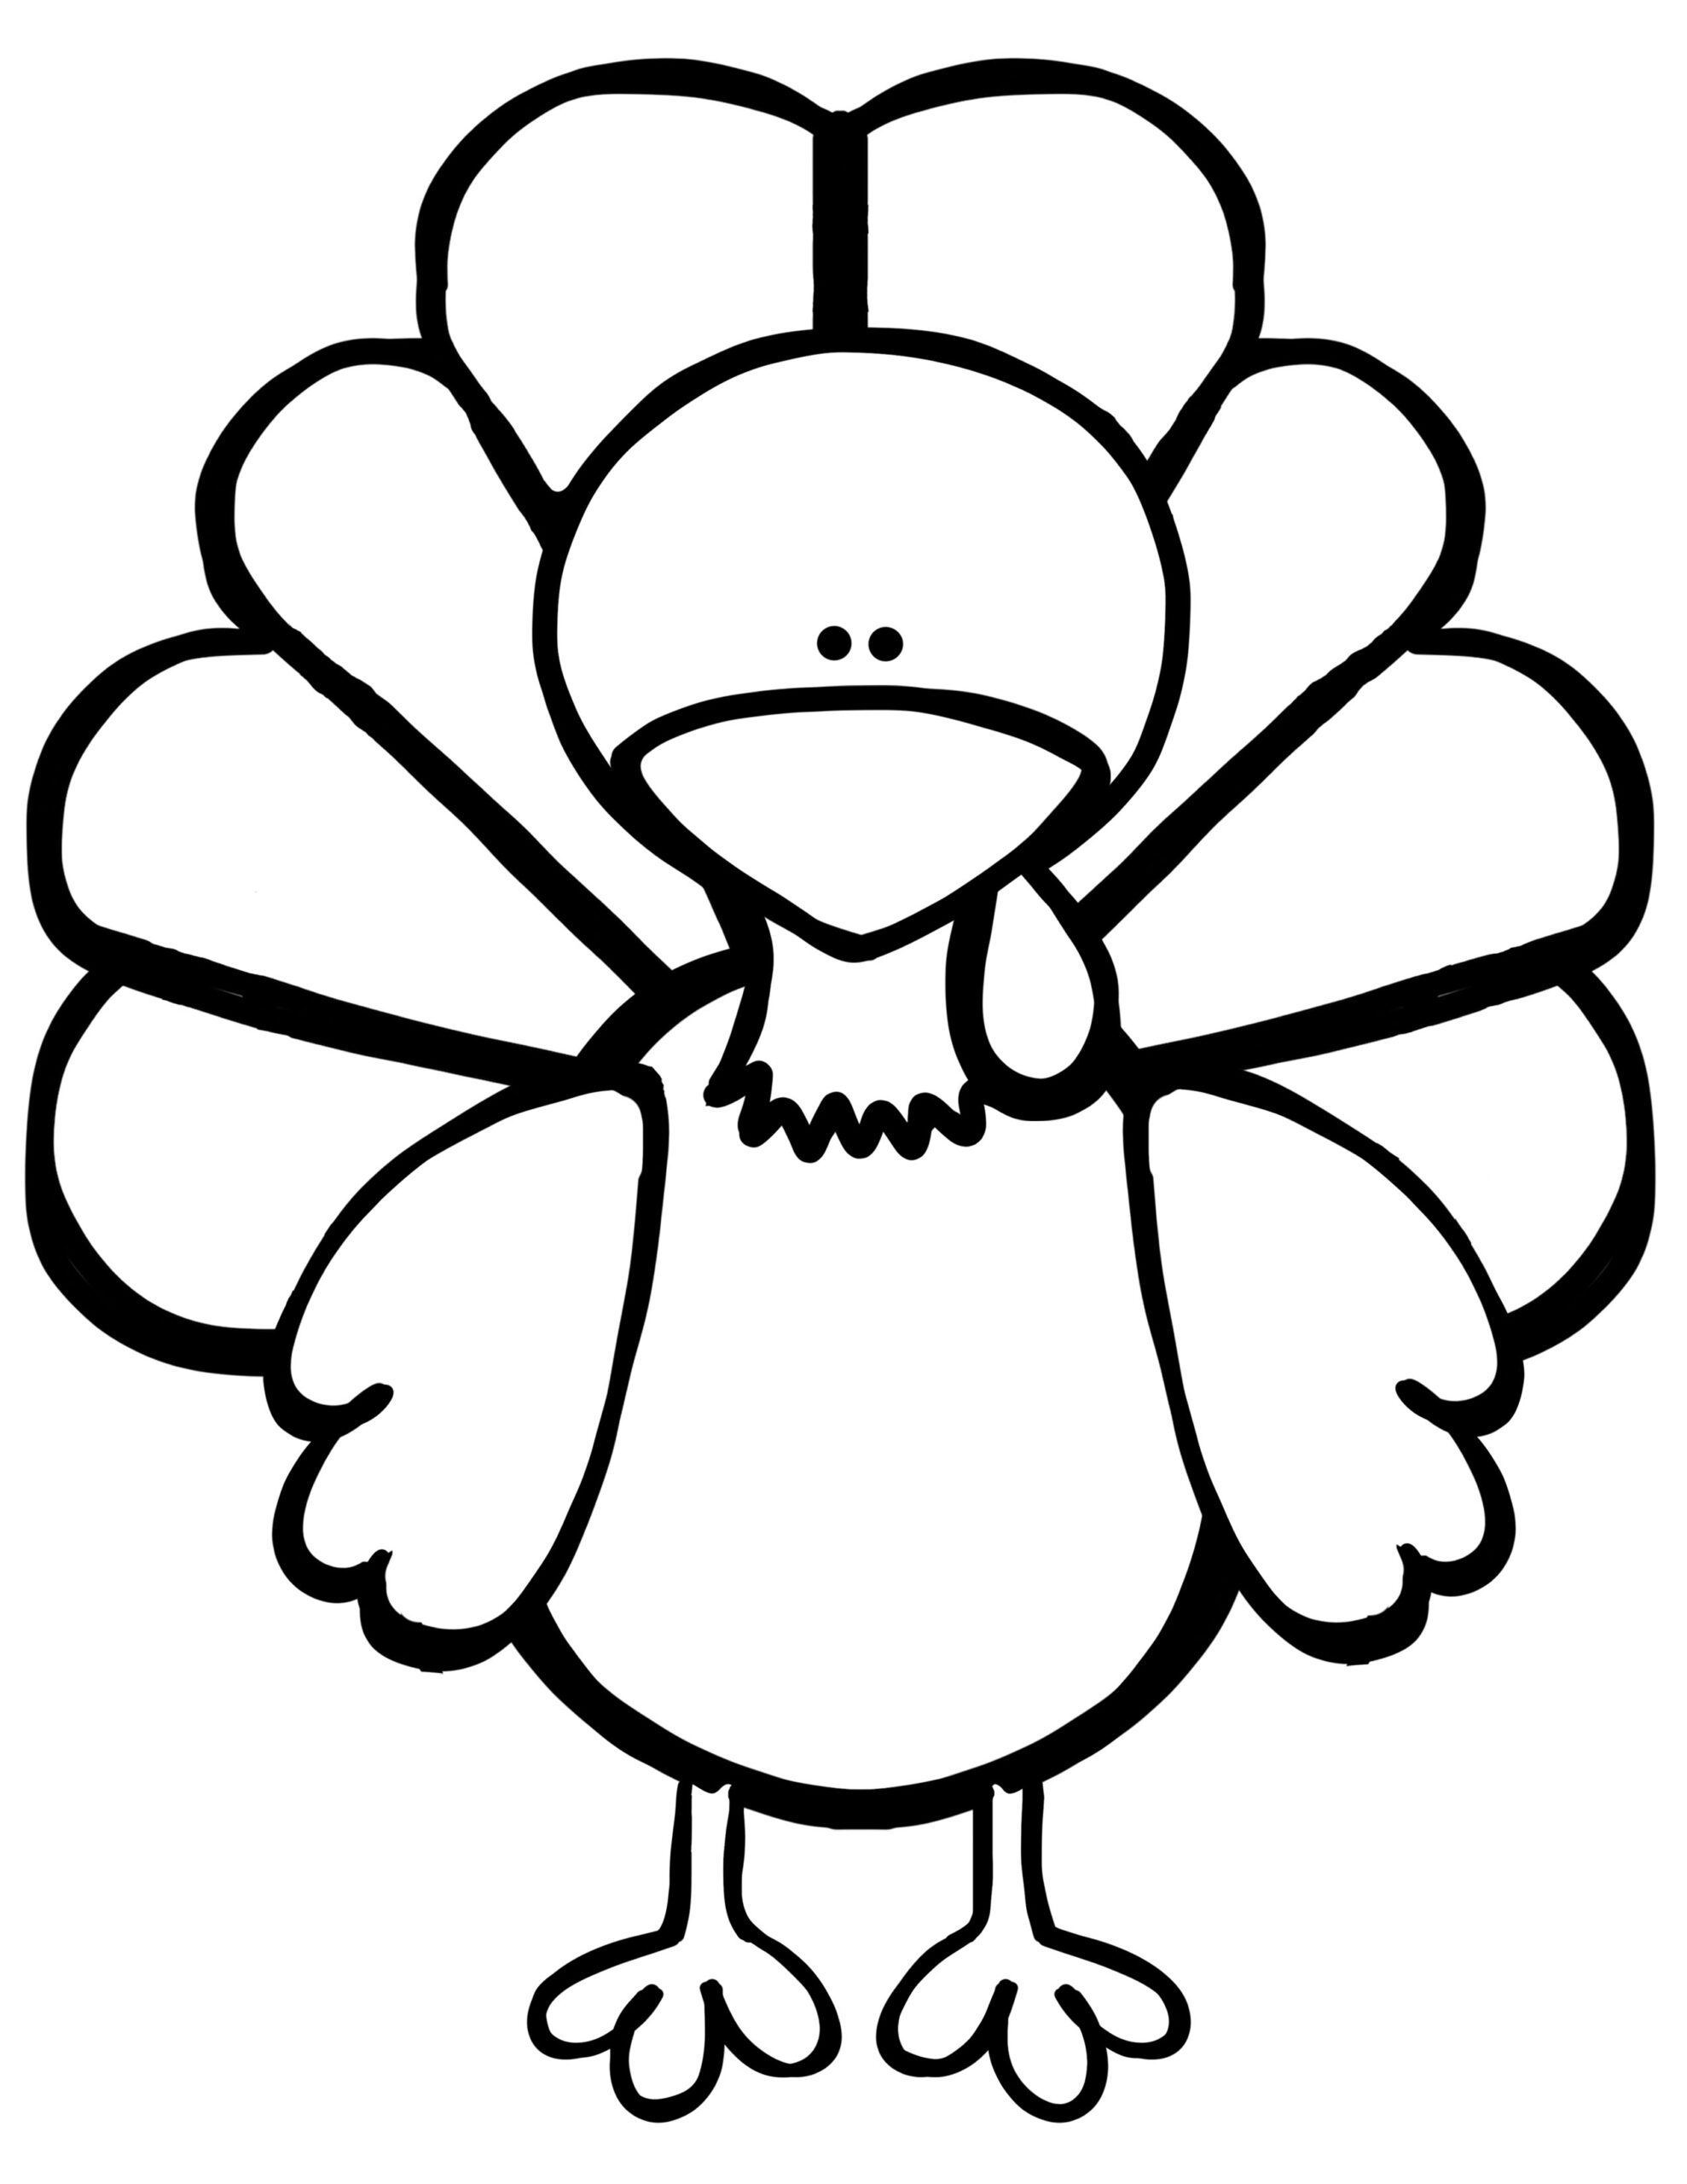 Everything You Need for the Turkey Disguise Project - Innovation  With Blank Turkey Template